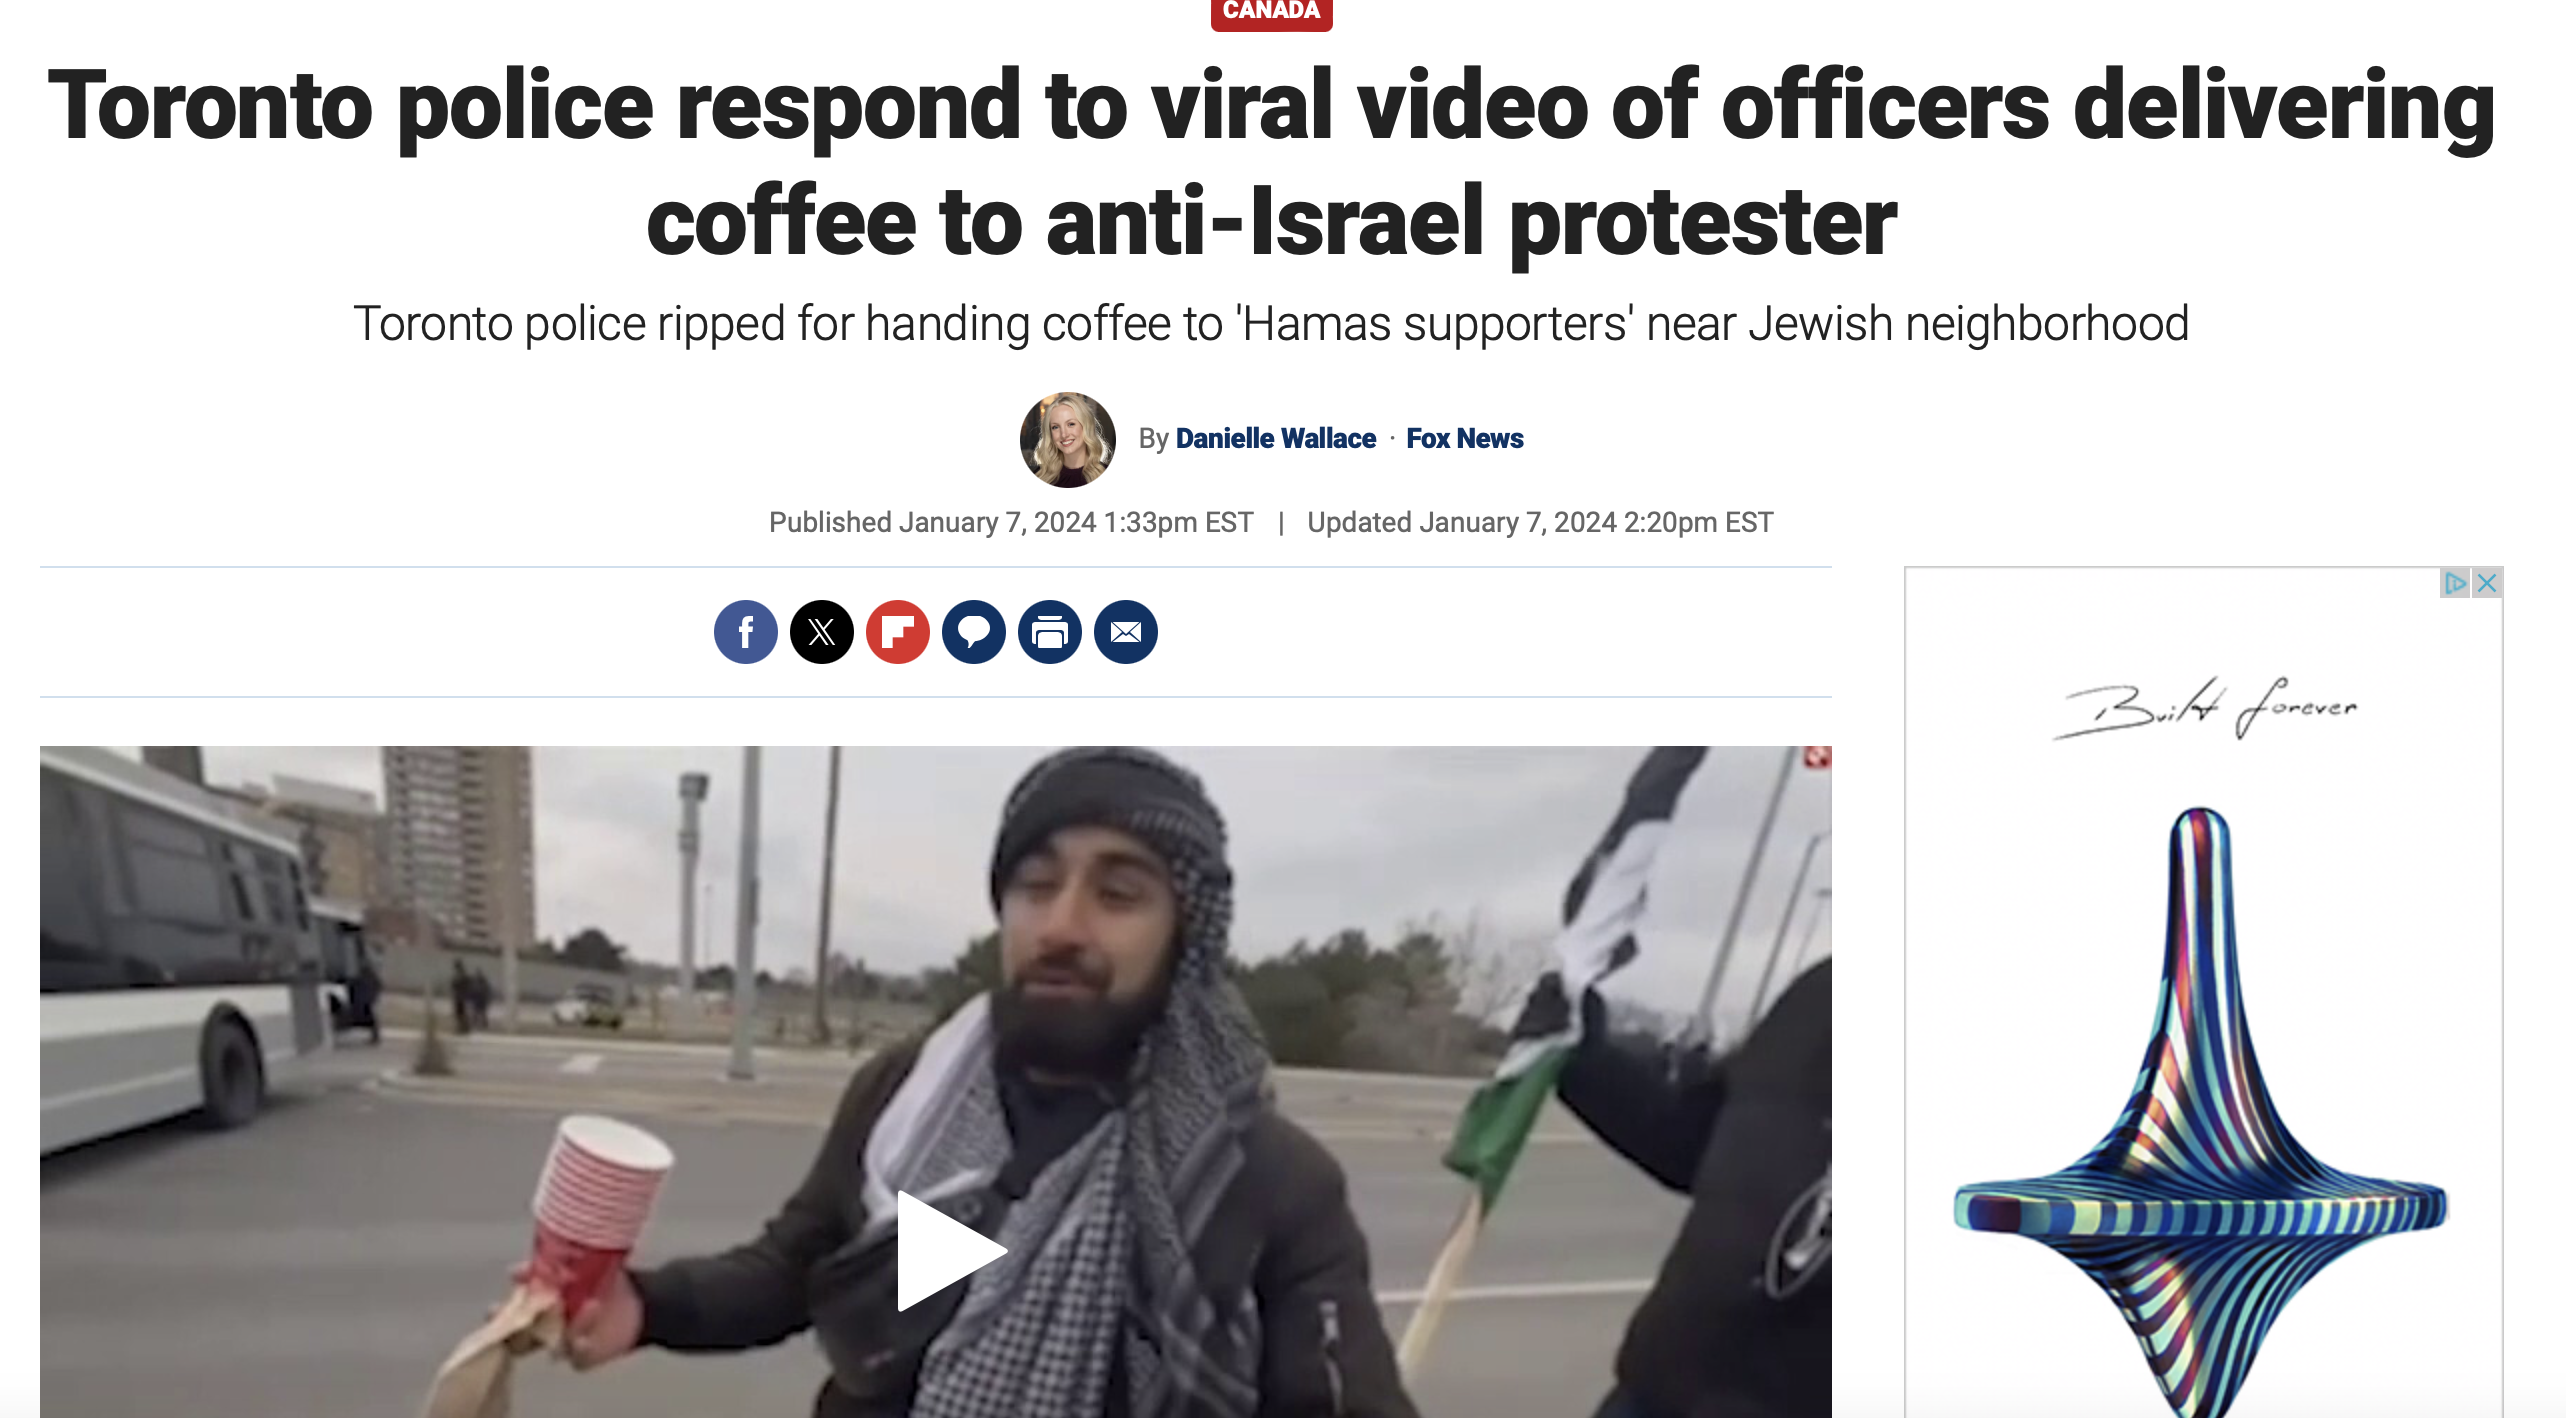 Canada's pro-Israel lobby attacks the right to protest